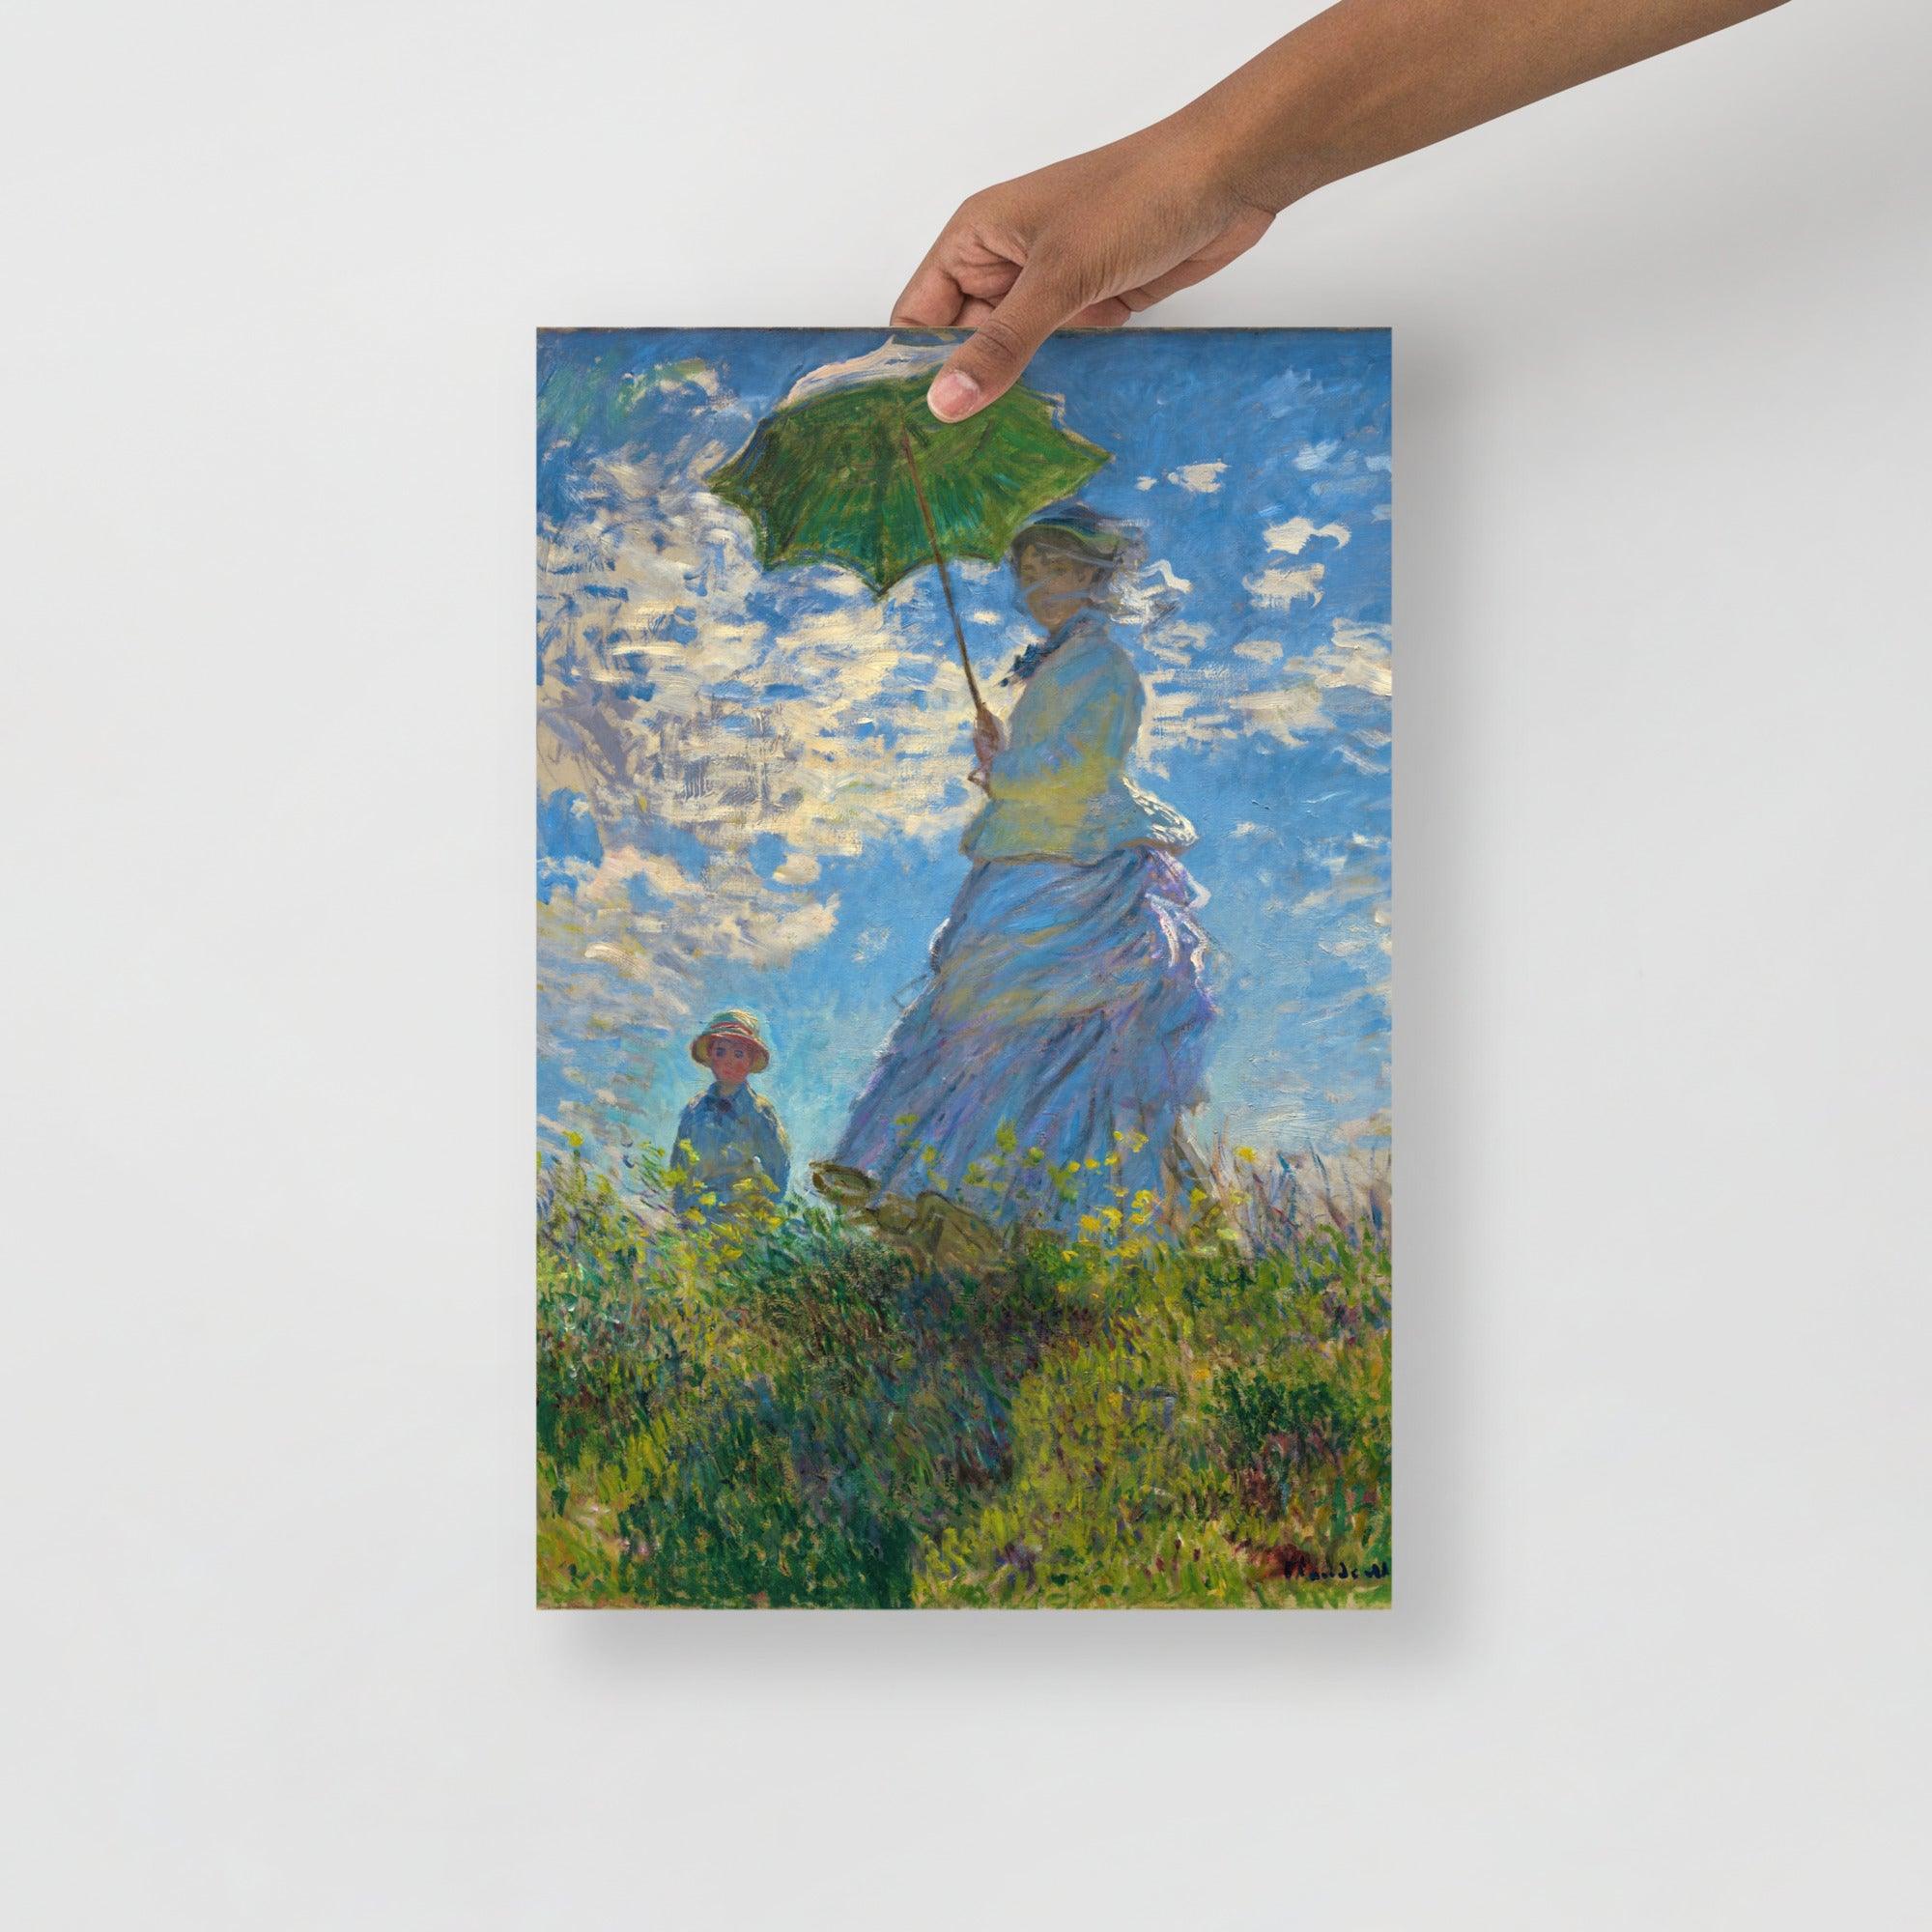 A Madame Monet and Her Son by Claude Monet poster on a plain backdrop in size 12x18”.